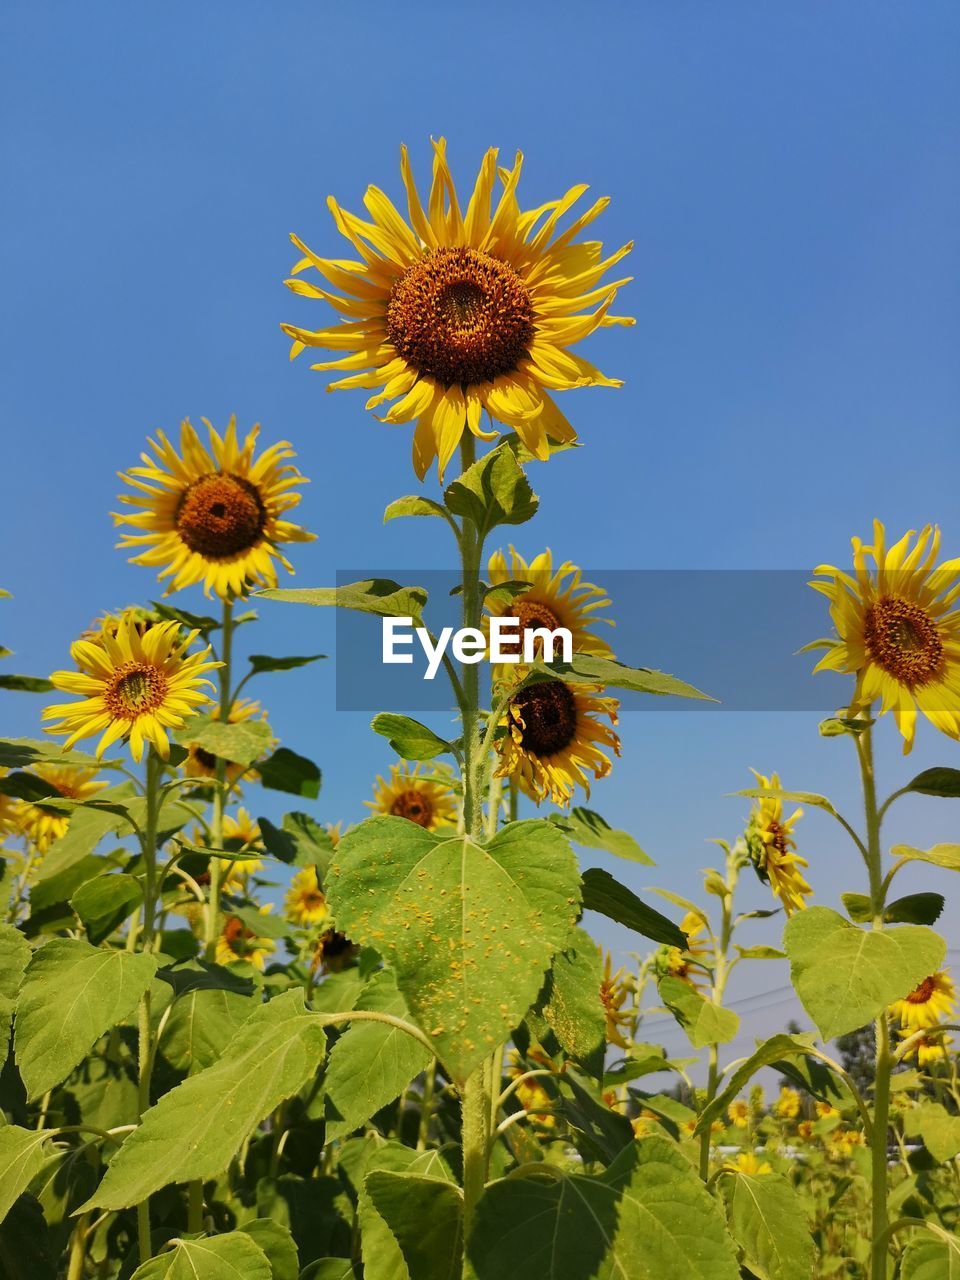 CLOSE-UP OF SUNFLOWERS ON FLOWERING PLANT